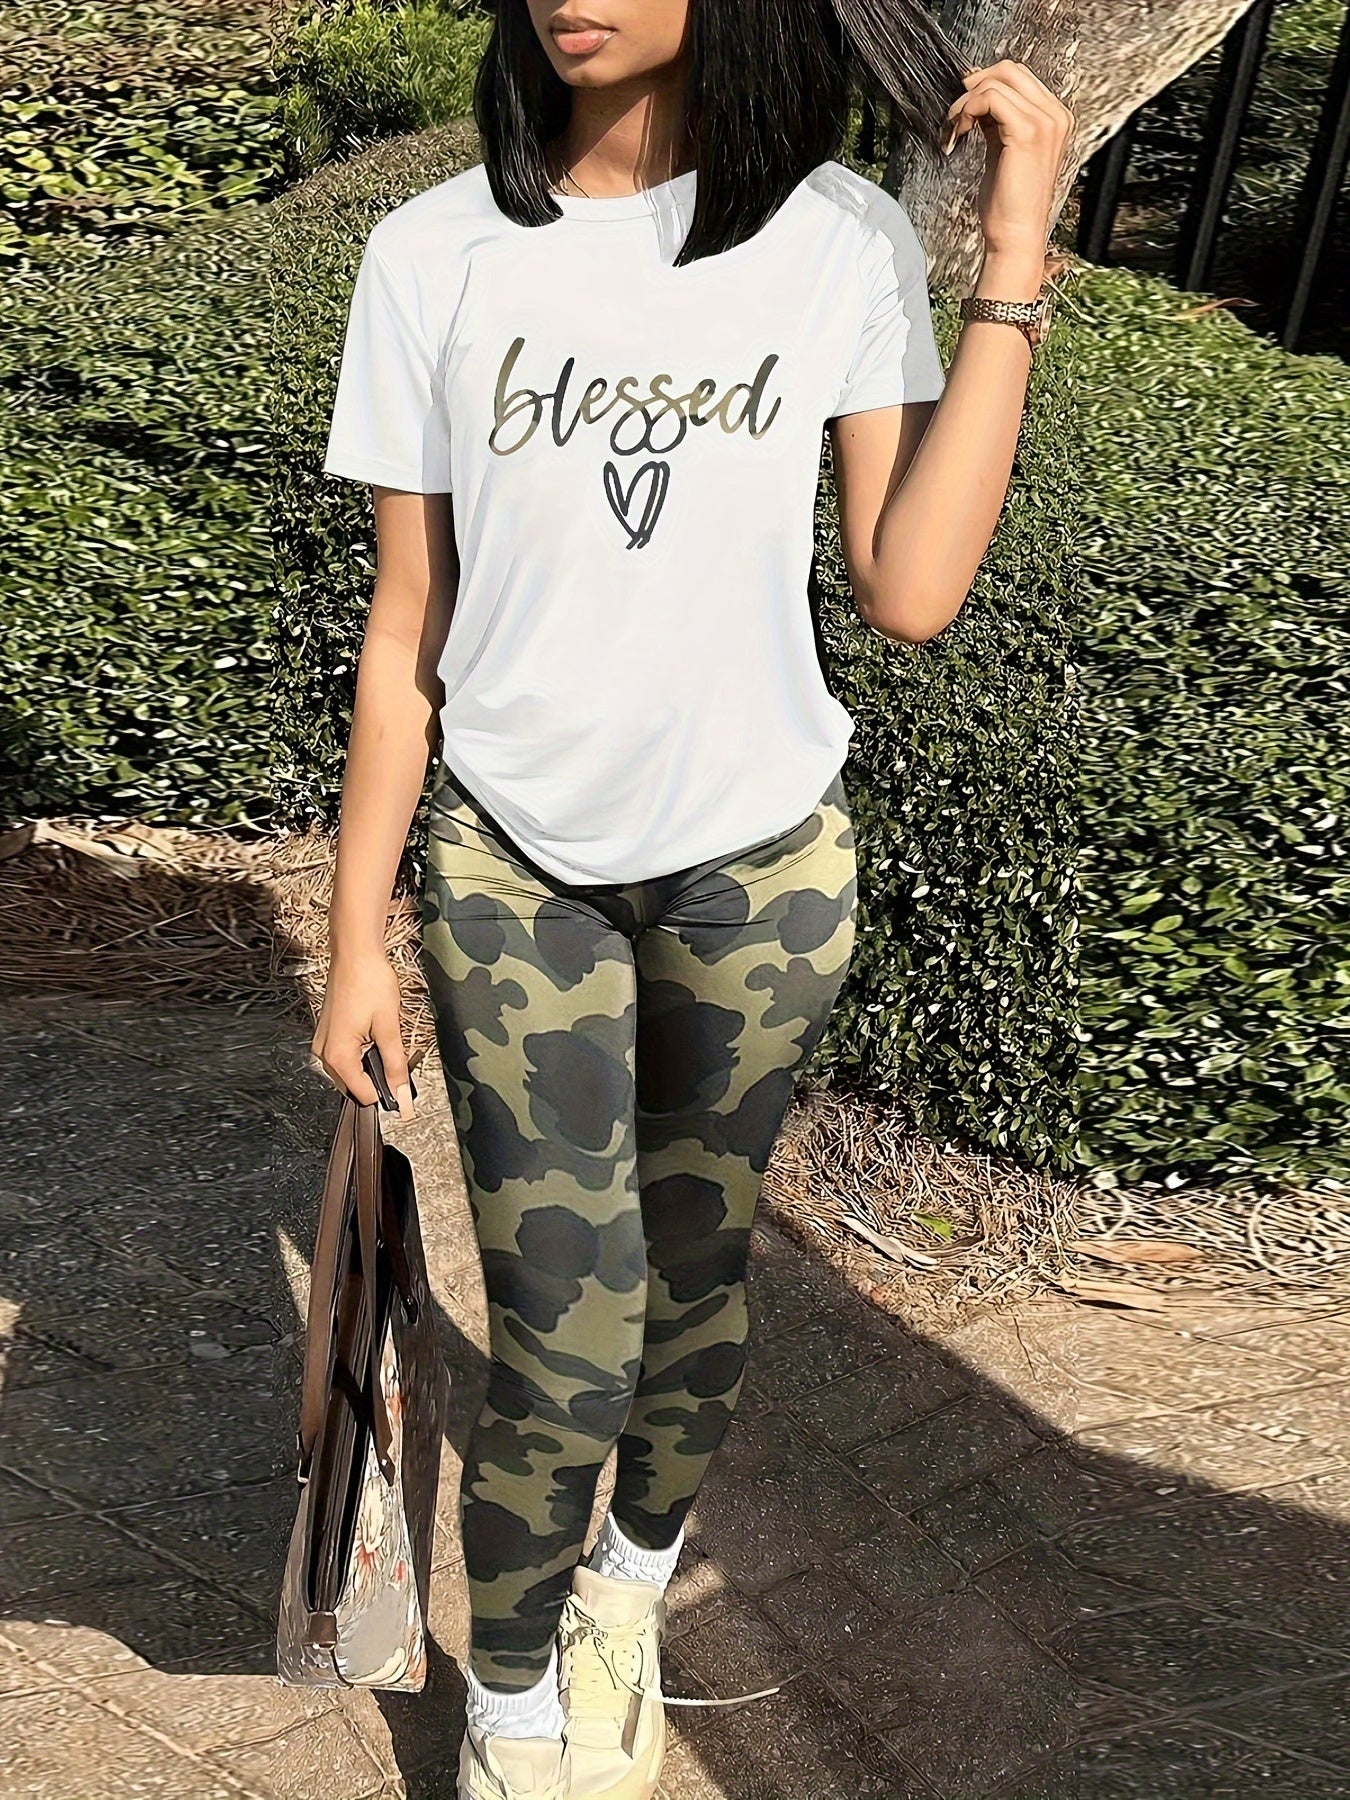 Blessed (camouflage) Women's Christian Casual Outfit claimedbygoddesigns